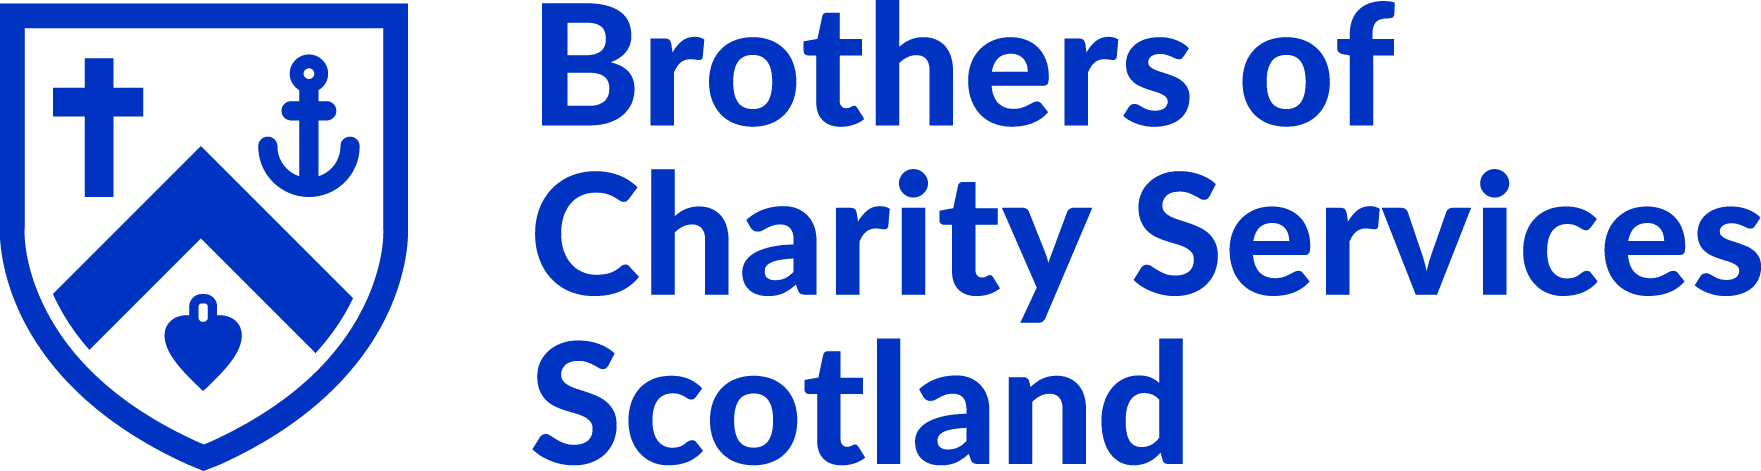 Brothers of Charity Services Scotland